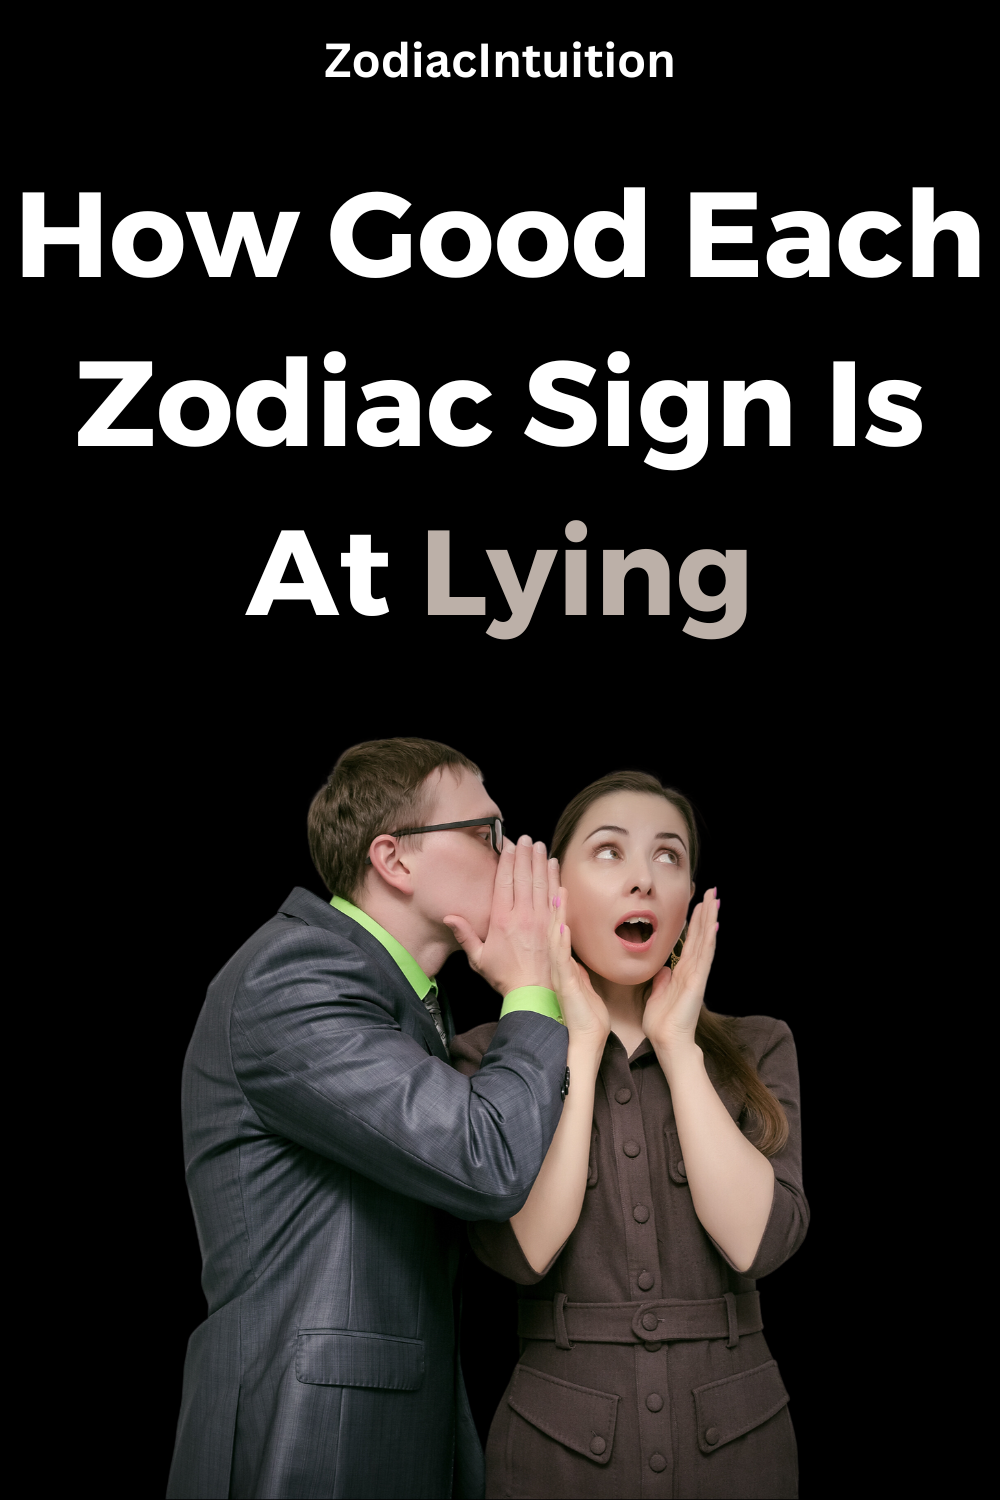 How Good Each Zodiac Sign Is At Lying